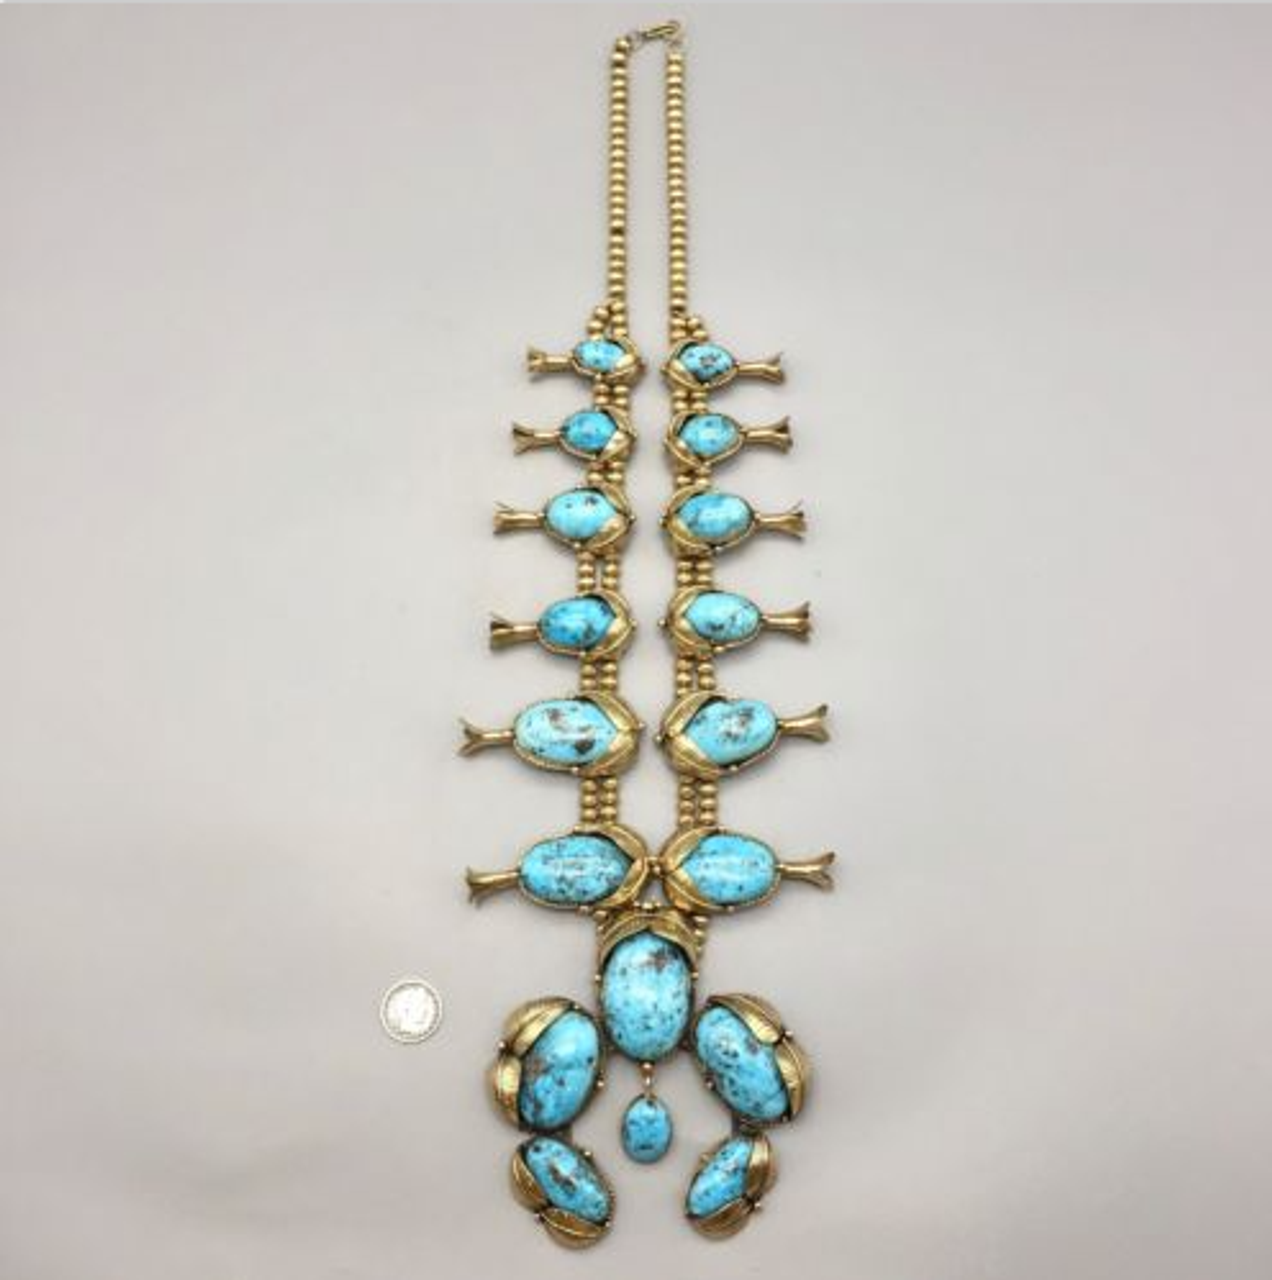 Zia Squash Blossom Necklace: Enchantment Sun Blossom Necklace | T.Skies Jewelry